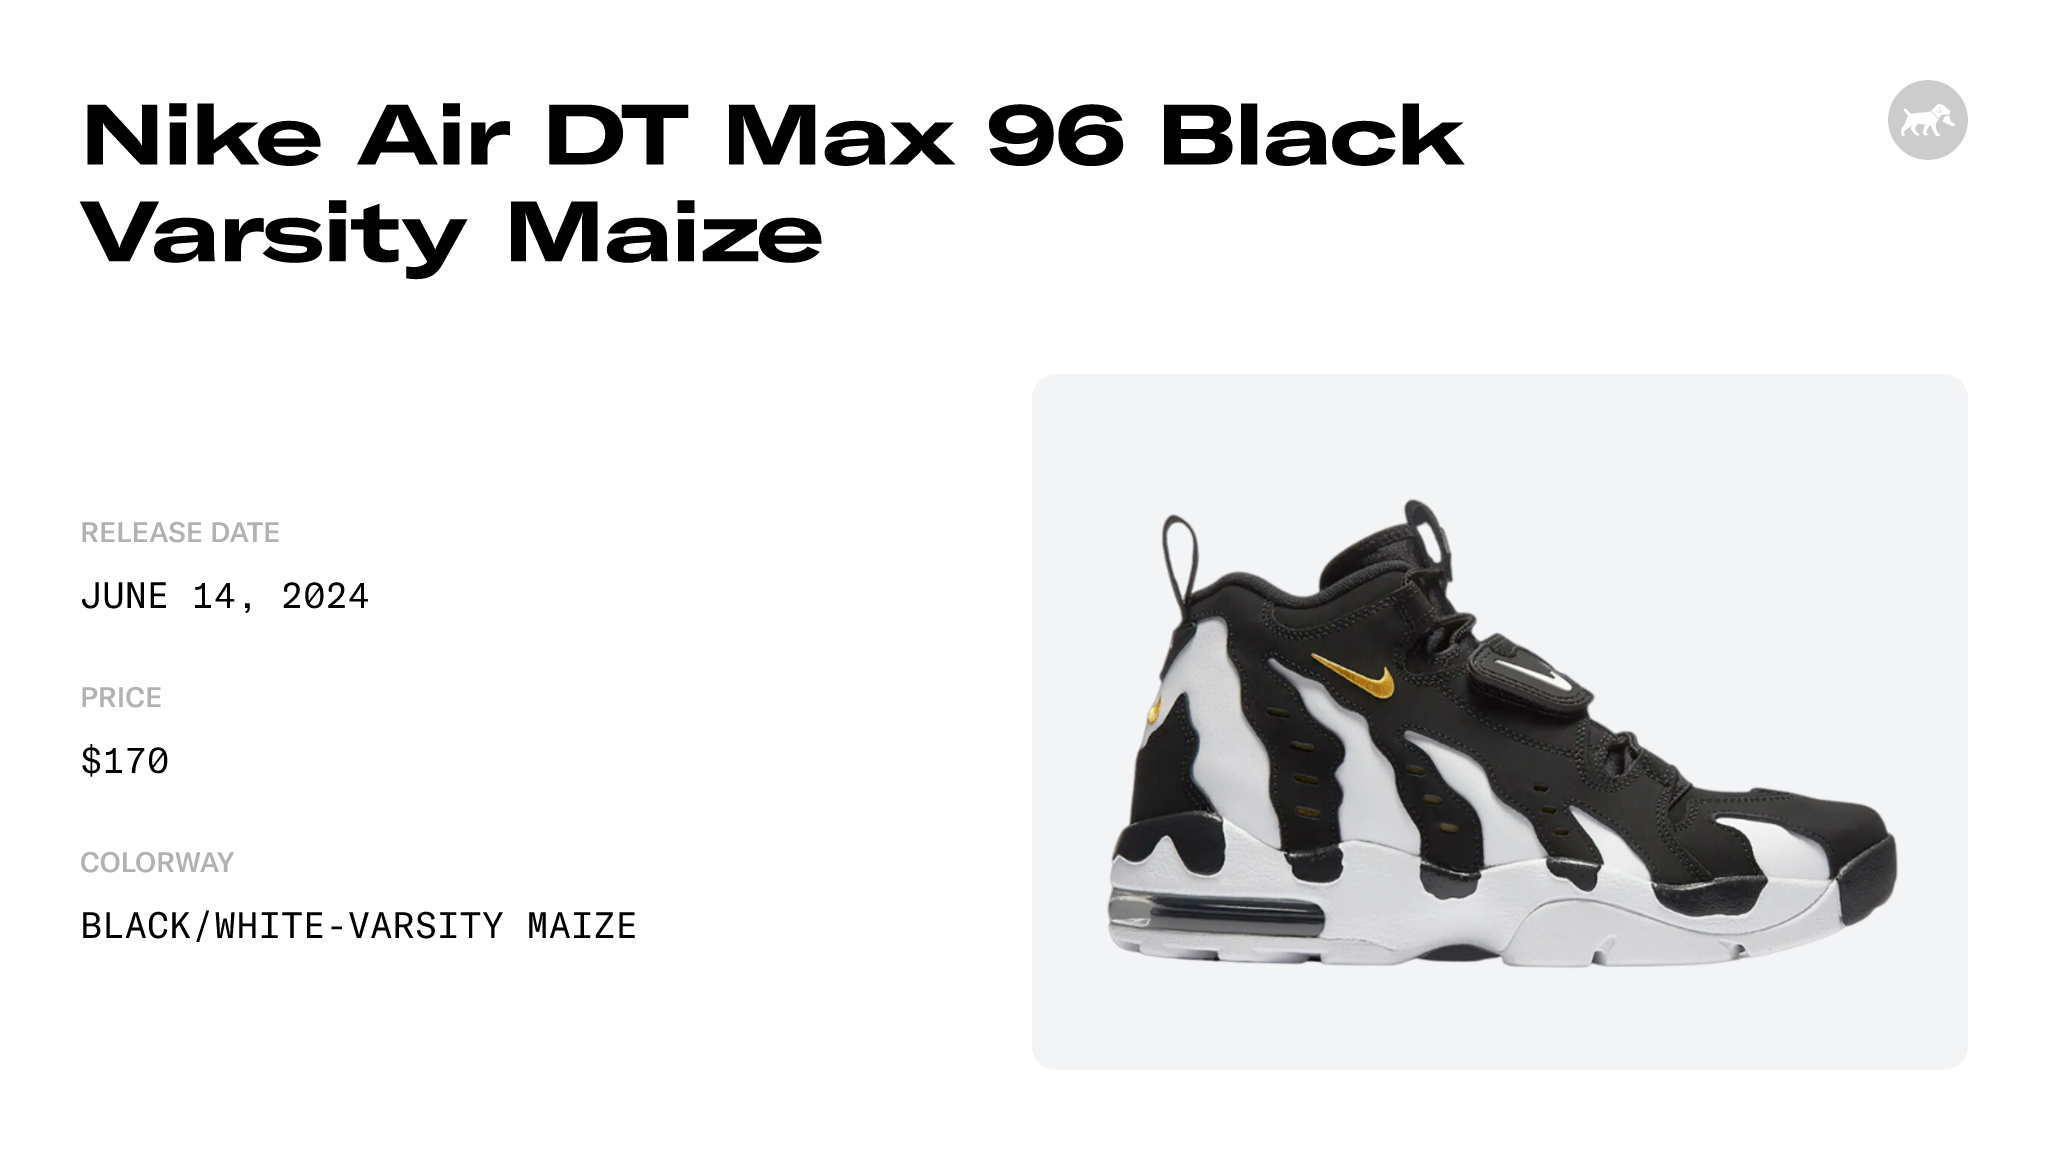 Nike Air DT Max 96 Black Varsity Maize - HM8249-001 Raffles and Release Date